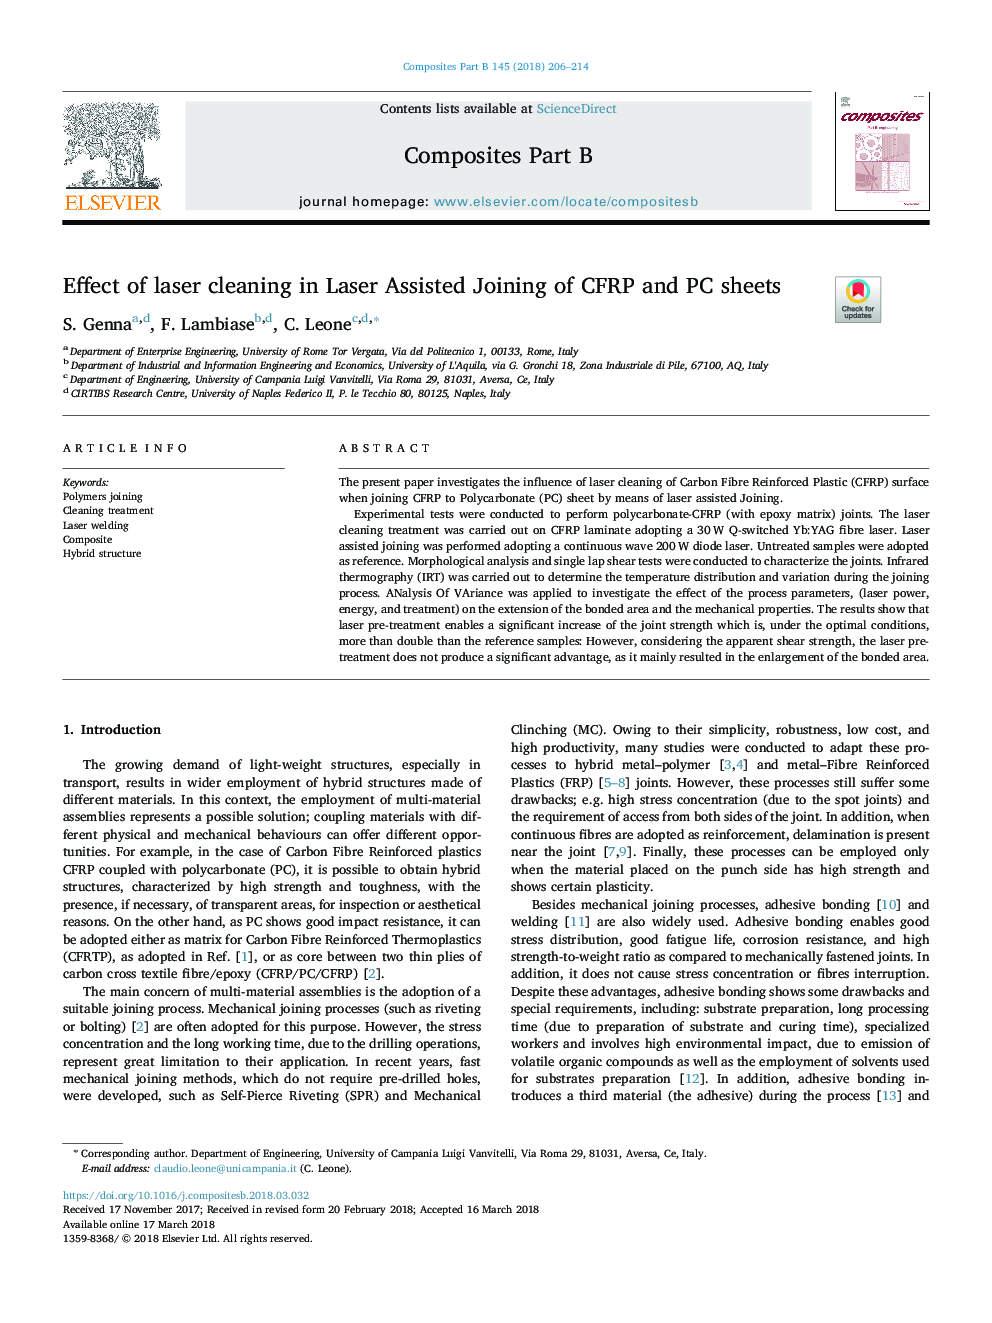 Effect of laser cleaning in Laser Assisted Joining of CFRP and PC sheets